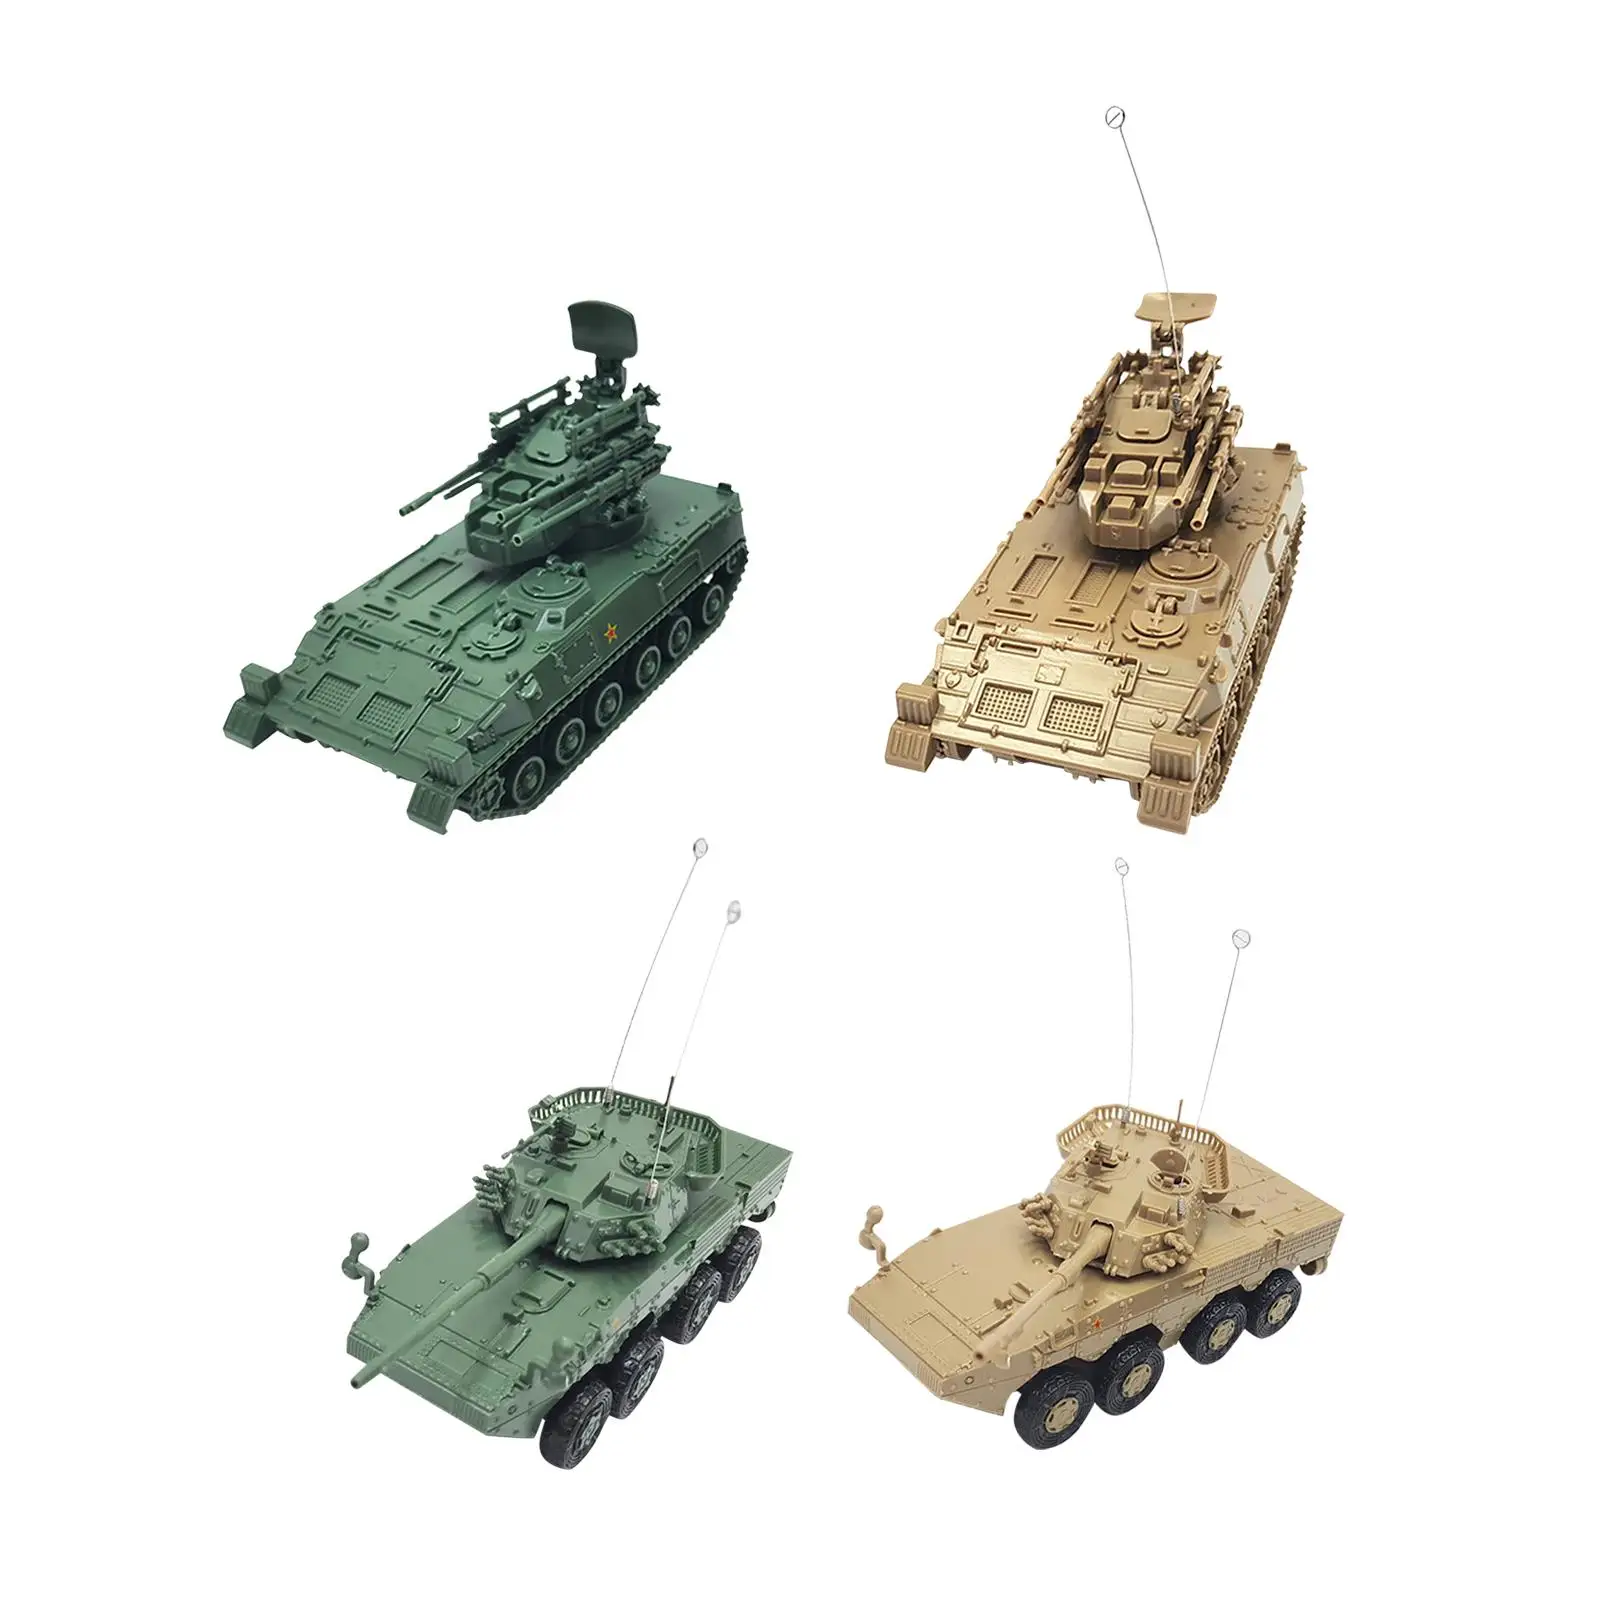 1:72 Armored Tank Model Crafts DIY Reconnaissance Vehicles Miniature Puzzle for Gift Collectibles Keepsake Education Toy Display